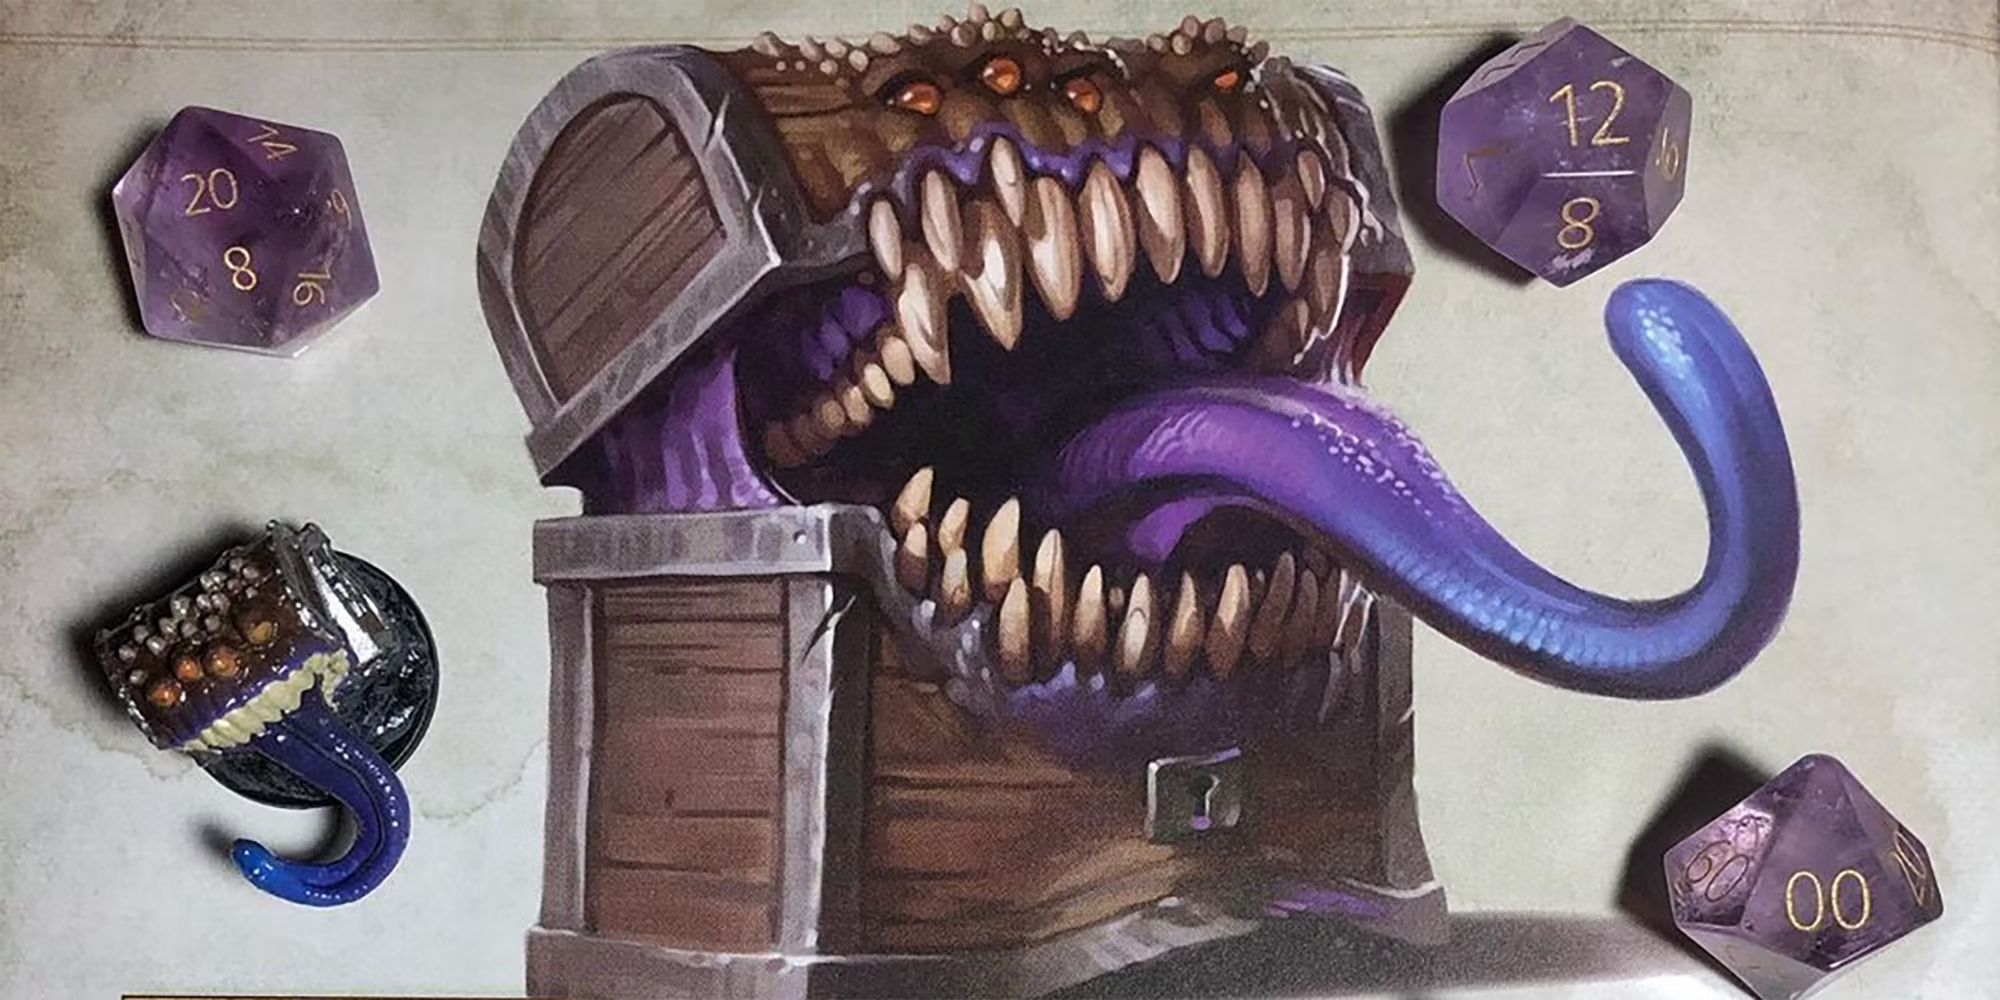 An illustration of a D&D mimic, surrounded by purple dice and a mimic miniature.